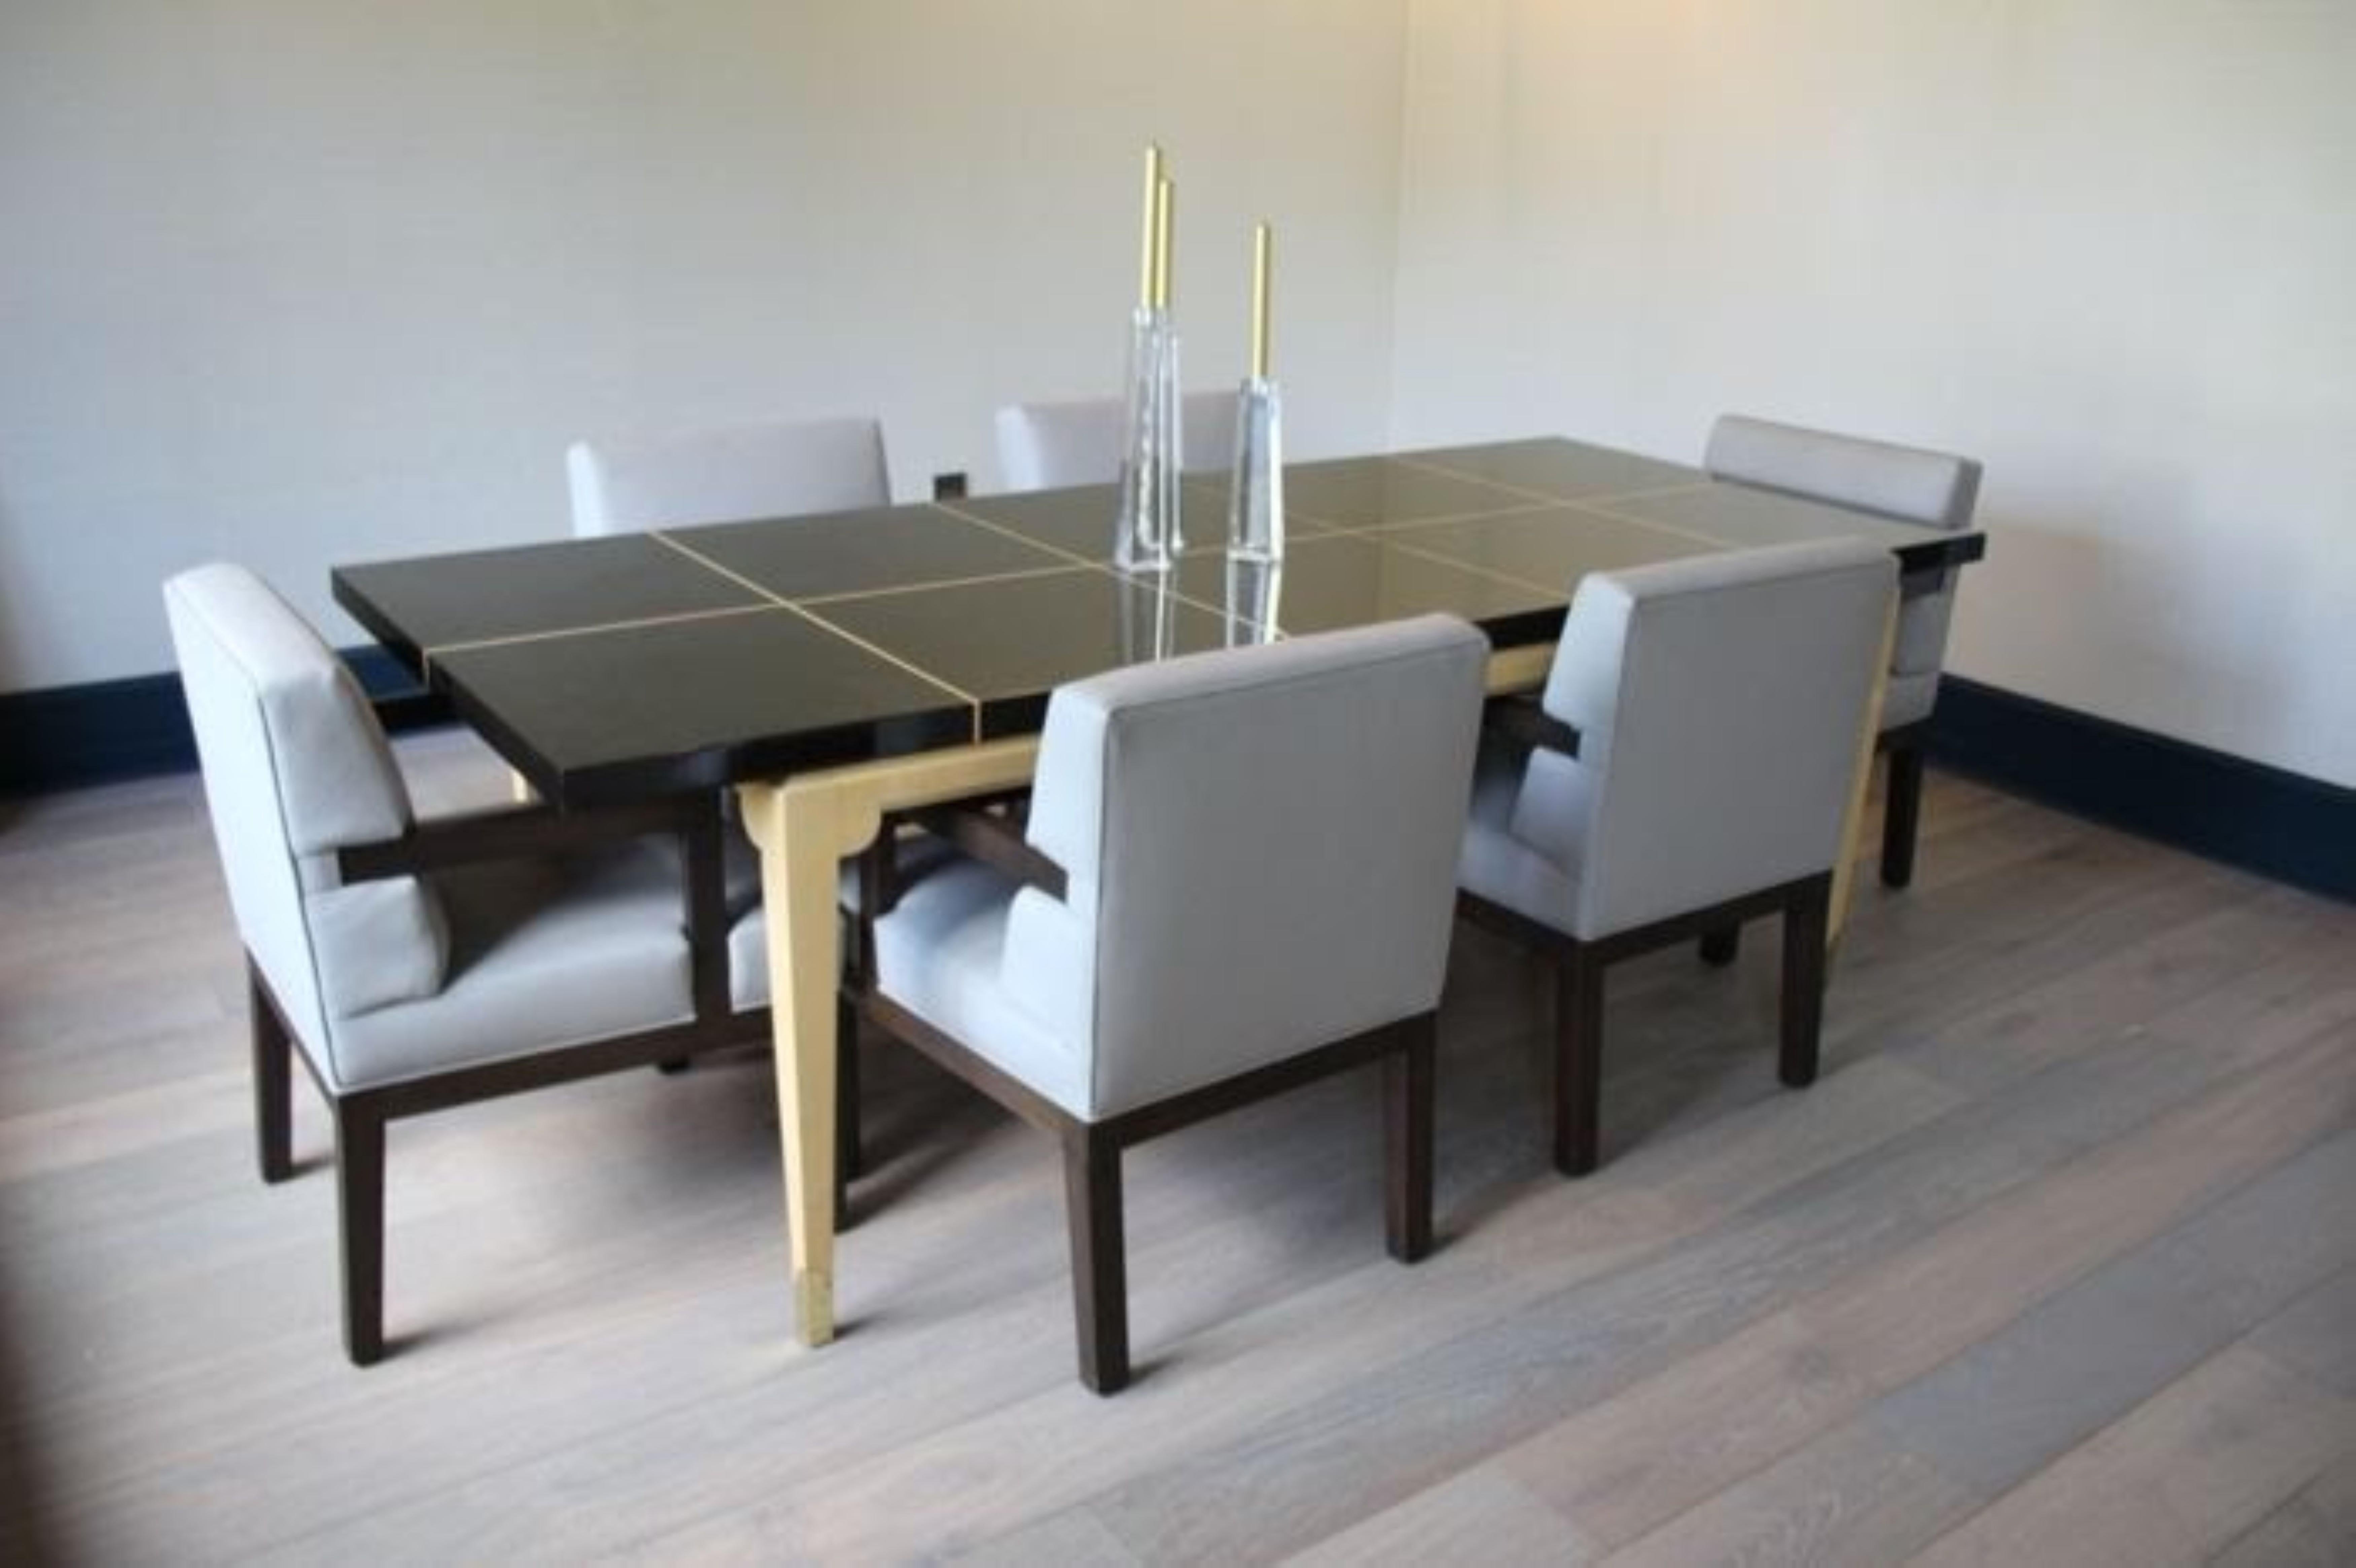 Breathtaking No. 161 dining table by Tommi Parzinger for Parzinger Originals featuring an inlaid dark mahogany lacquered top inlaid with contrasting maple and laquered maple legs terminating in elegant brass sabots. There are two 18” table leaves